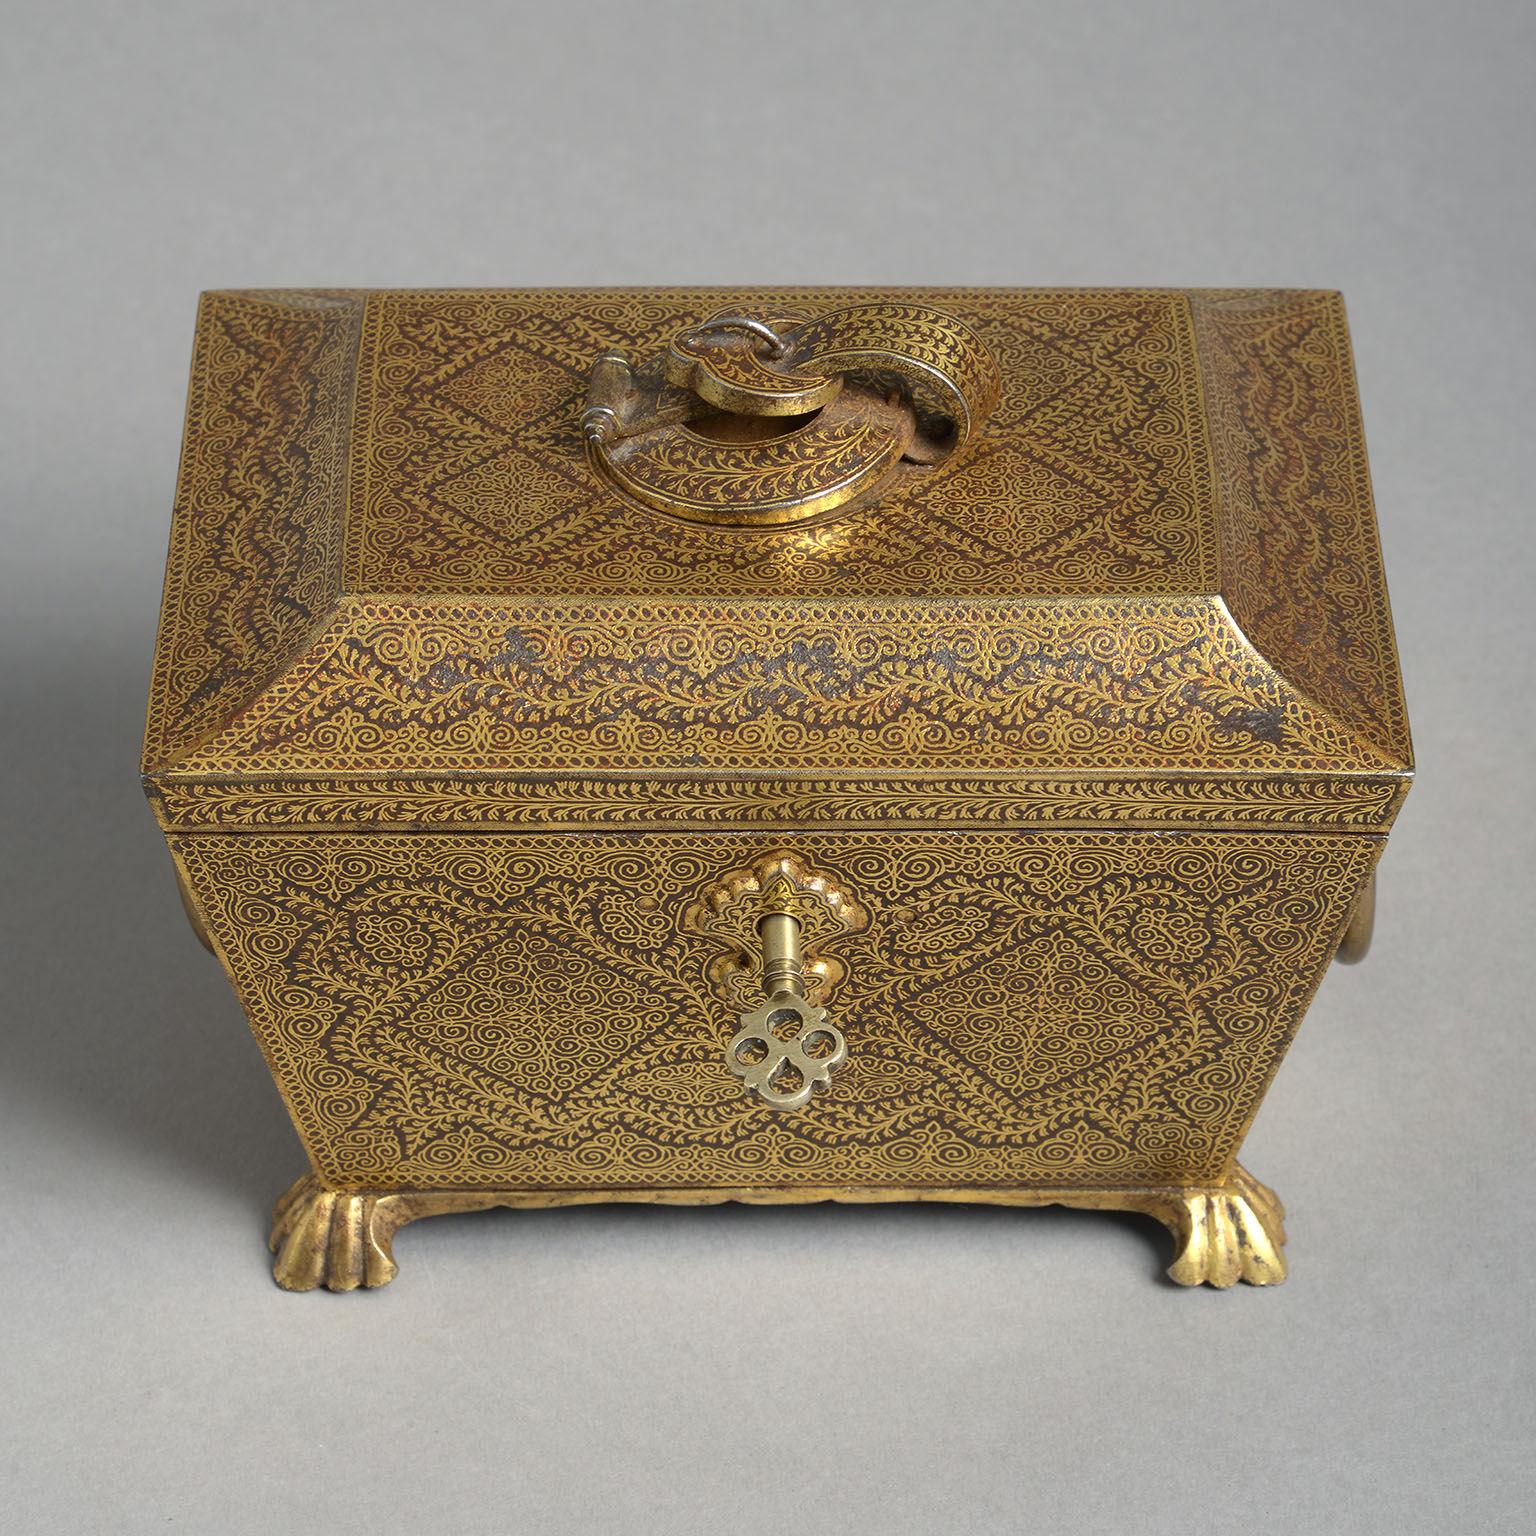 The steel sarcophagus form with fine, all-over Koftgari decoration in yellow gold. The hinged, tented lid with central buckle decoration a above a tapering body with ring handles to the sides and raised on braganza feet. Complete with original key.